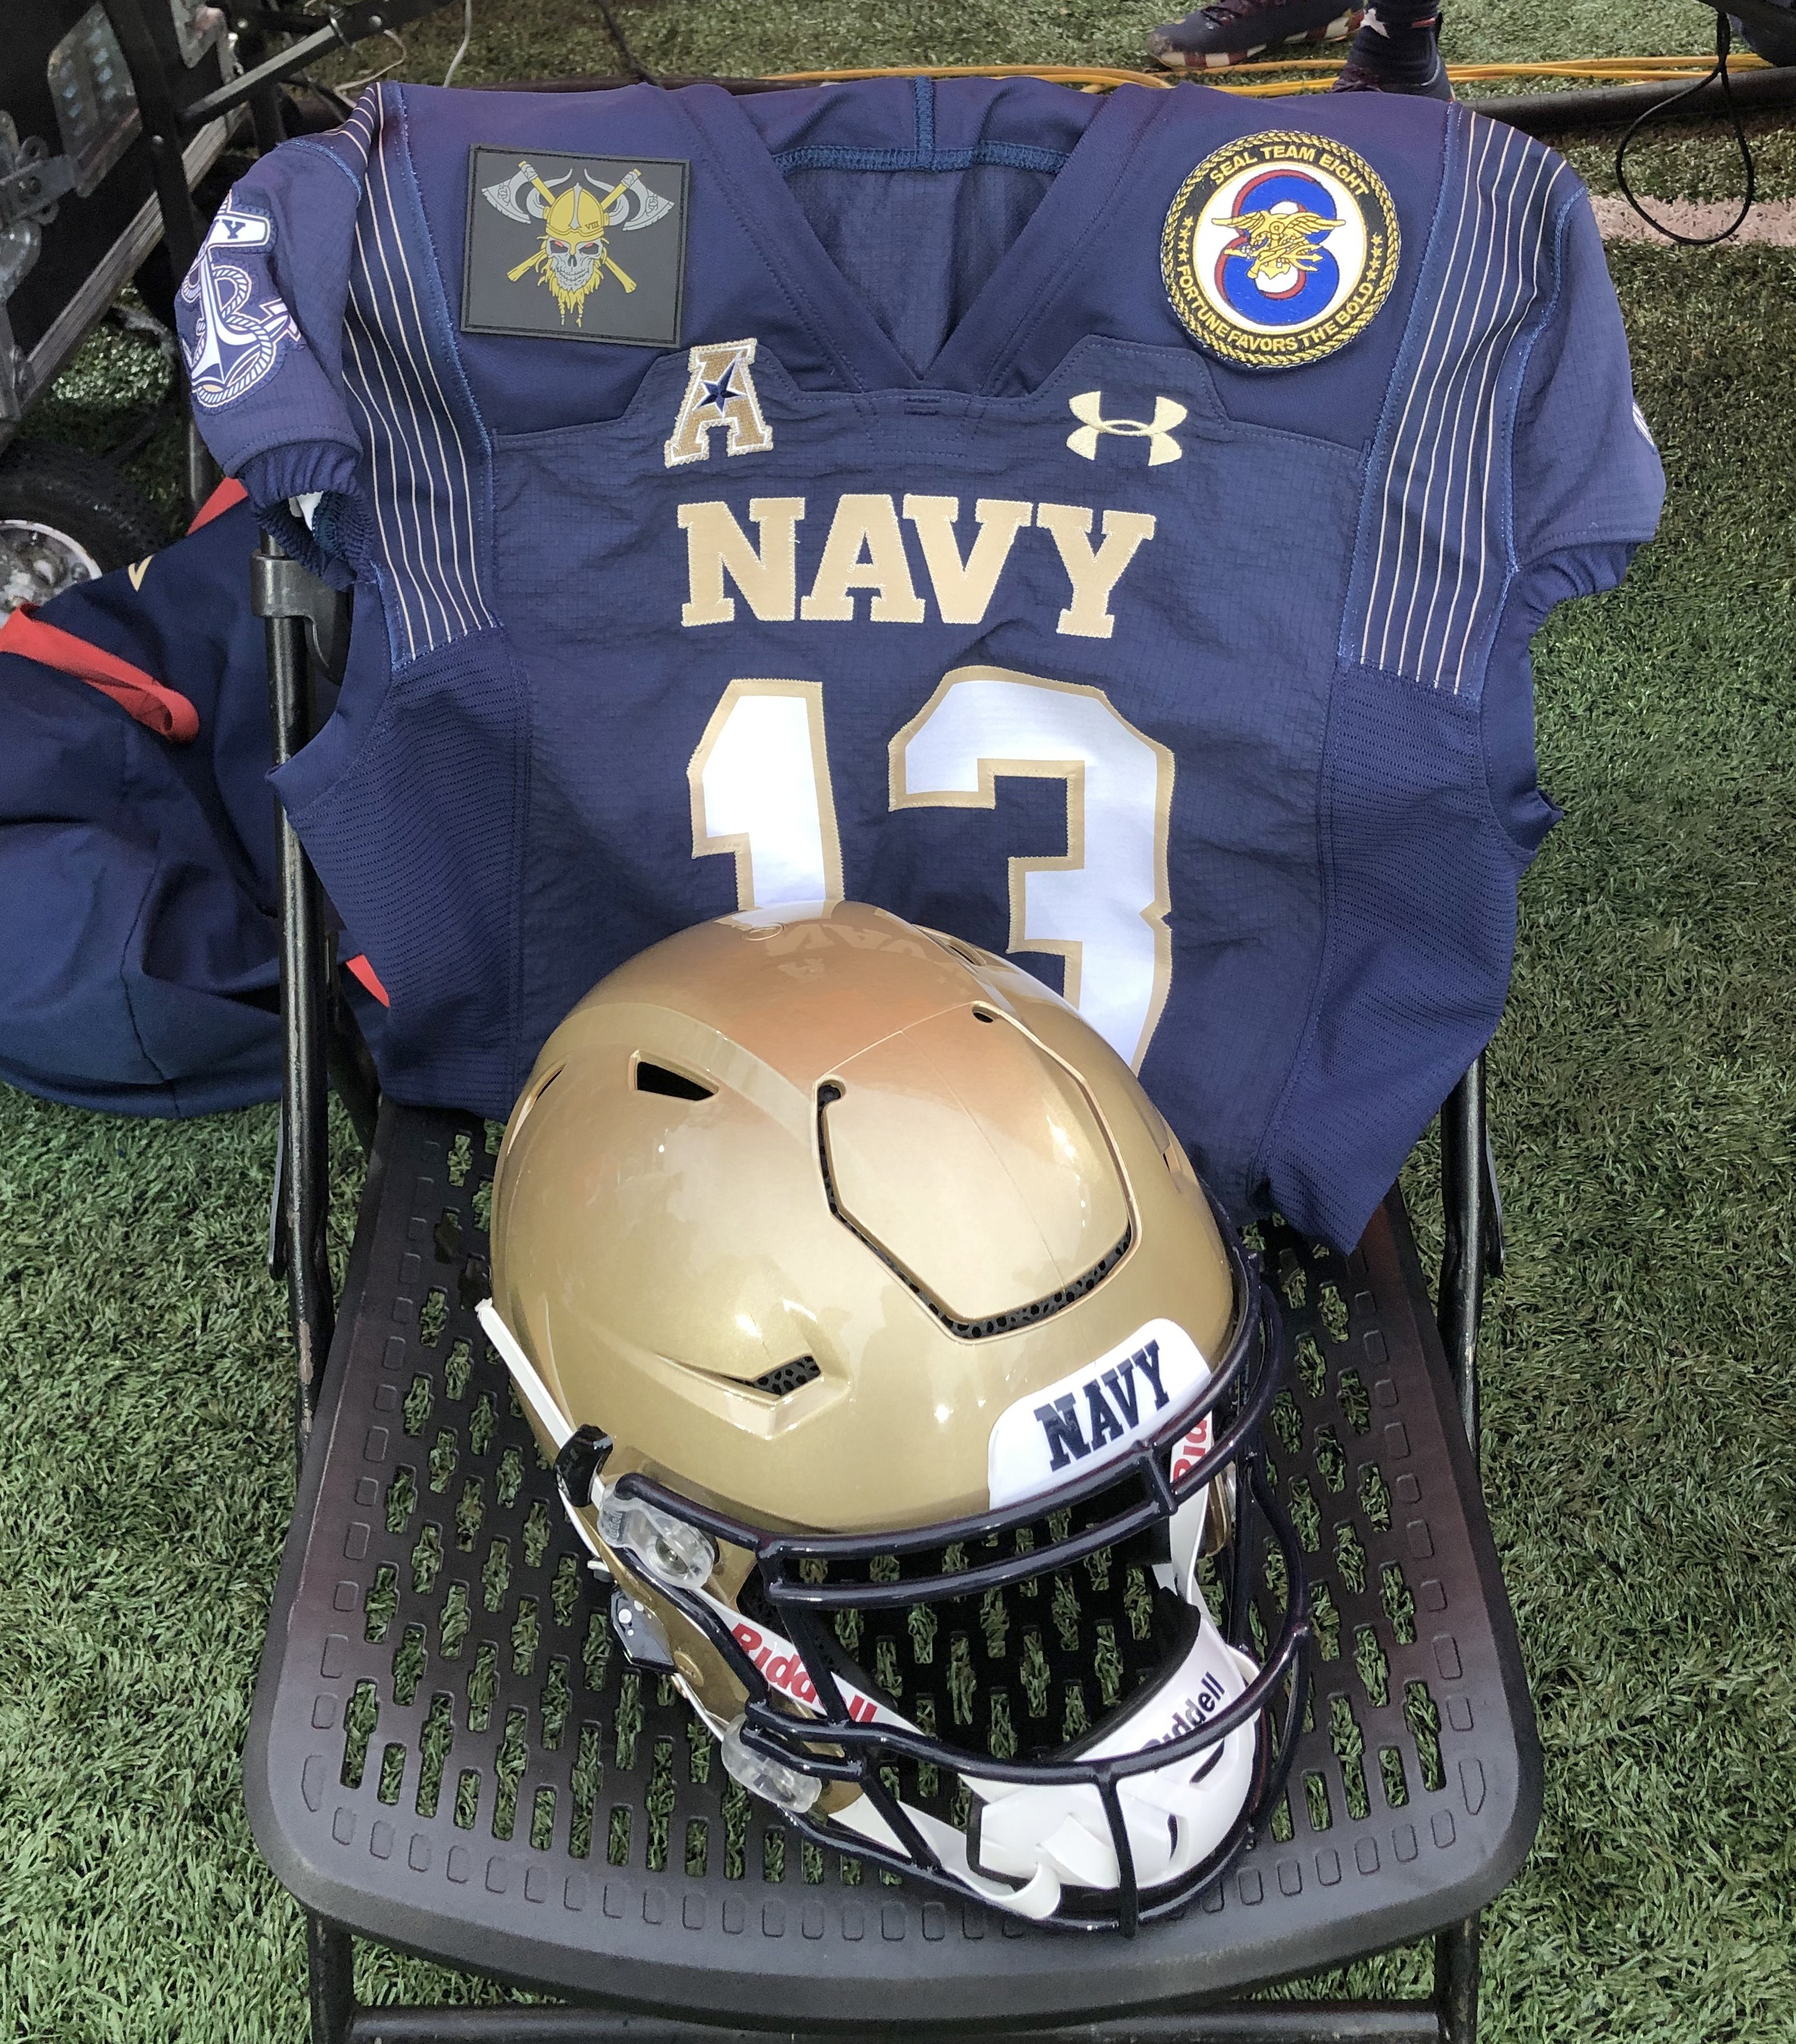 Navy Football reveals uniforms for Army-Navy game - CBS Baltimore